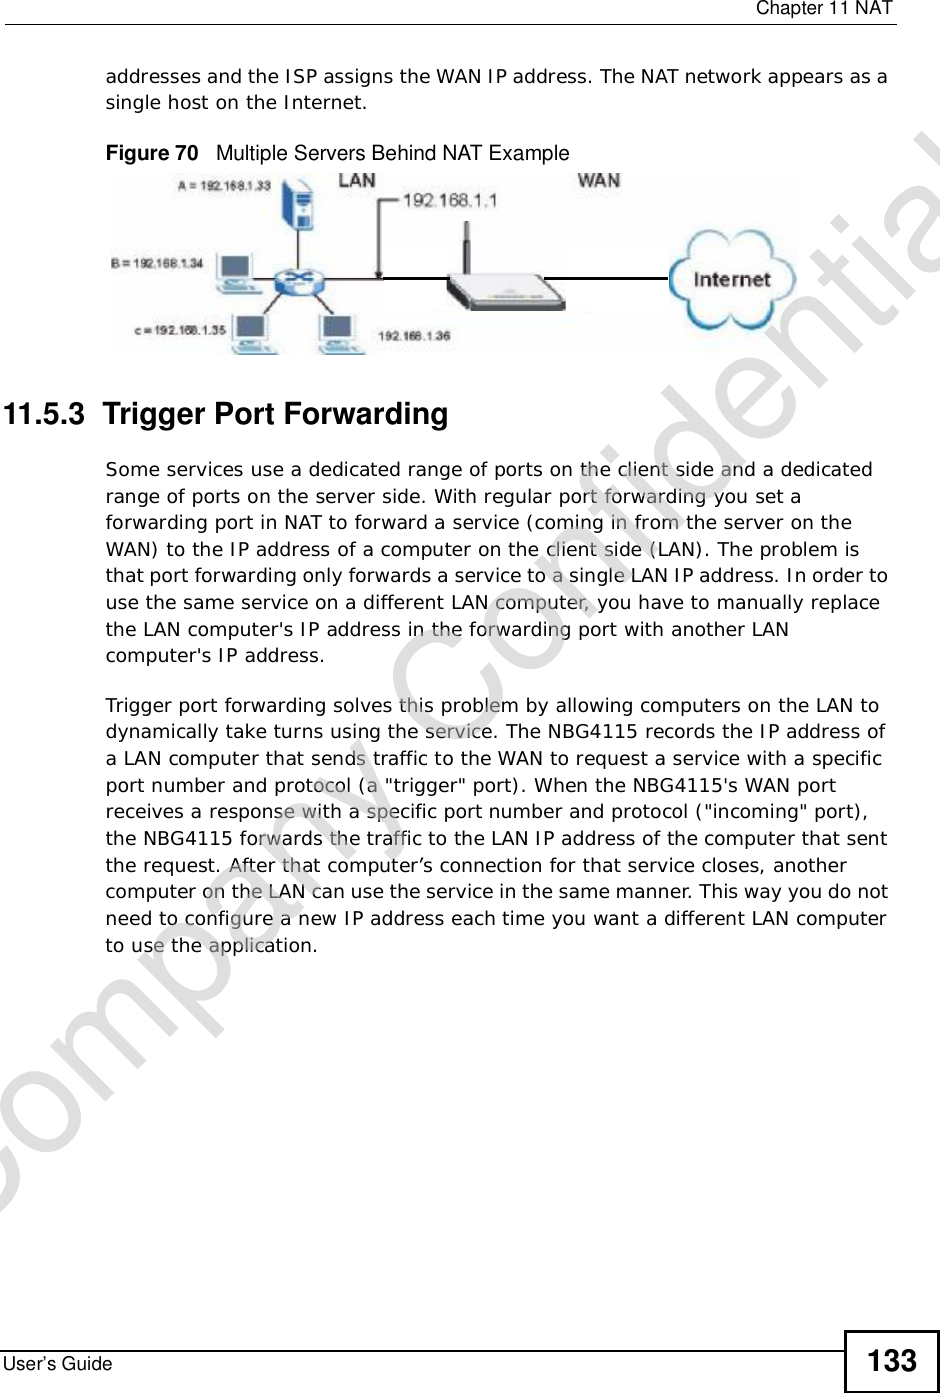  Chapter 11NATUser’s Guide 133addresses and the ISP assigns the WAN IP address. The NAT network appears as a single host on the Internet.Figure 70   Multiple Servers Behind NAT Example11.5.3  Trigger Port Forwarding Some services use a dedicated range of ports on the client side and a dedicated range of ports on the server side. With regular port forwarding you set a forwarding port in NAT to forward a service (coming in from the server on the WAN) to the IP address of a computer on the client side (LAN). The problem is that port forwarding only forwards a service to a single LAN IP address. In order to use the same service on a different LAN computer, you have to manually replace the LAN computer&apos;s IP address in the forwarding port with another LAN computer&apos;s IP address. Trigger port forwarding solves this problem by allowing computers on the LAN to dynamically take turns using the service. The NBG4115 records the IP address of a LAN computer that sends traffic to the WAN to request a service with a specific port number and protocol (a &quot;trigger&quot; port). When the NBG4115&apos;s WAN port receives a response with a specific port number and protocol (&quot;incoming&quot; port), the NBG4115 forwards the traffic to the LAN IP address of the computer that sent the request. After that computer’s connection for that service closes, another computer on the LAN can use the service in the same manner. This way you do not need to configure a new IP address each time you want a different LAN computer to use the application.Company Confidential